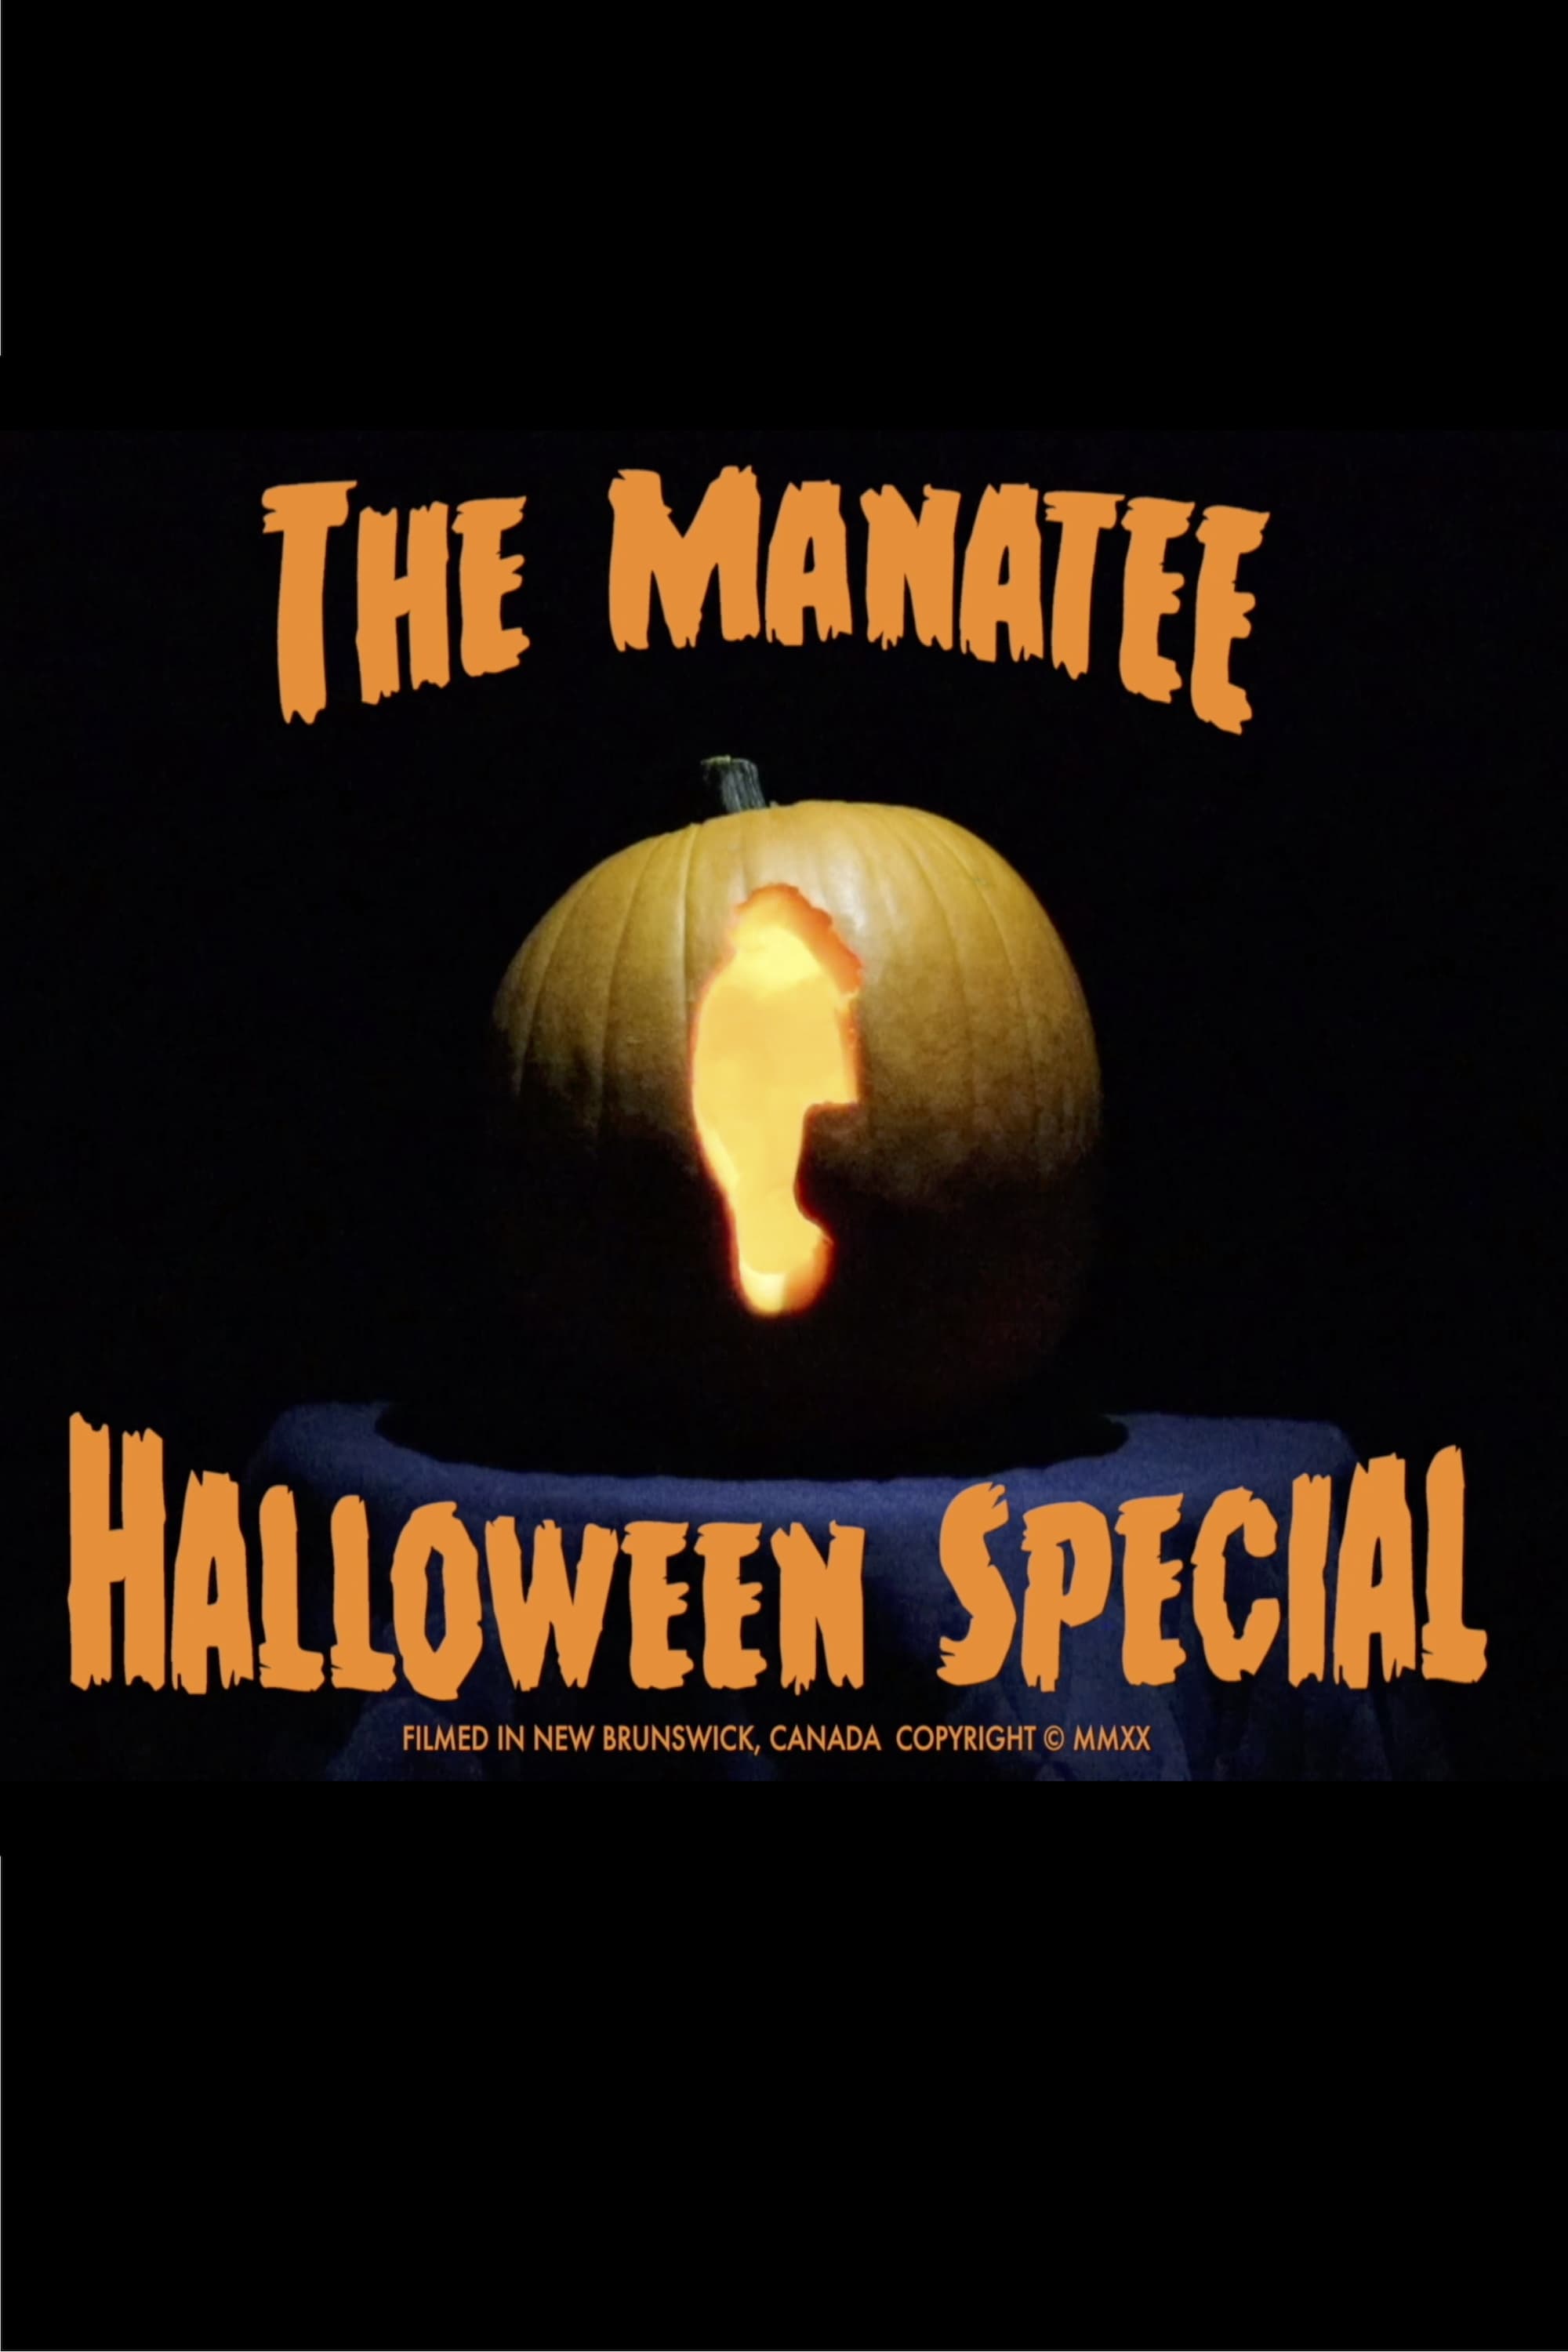 The Manatee Halloween Special